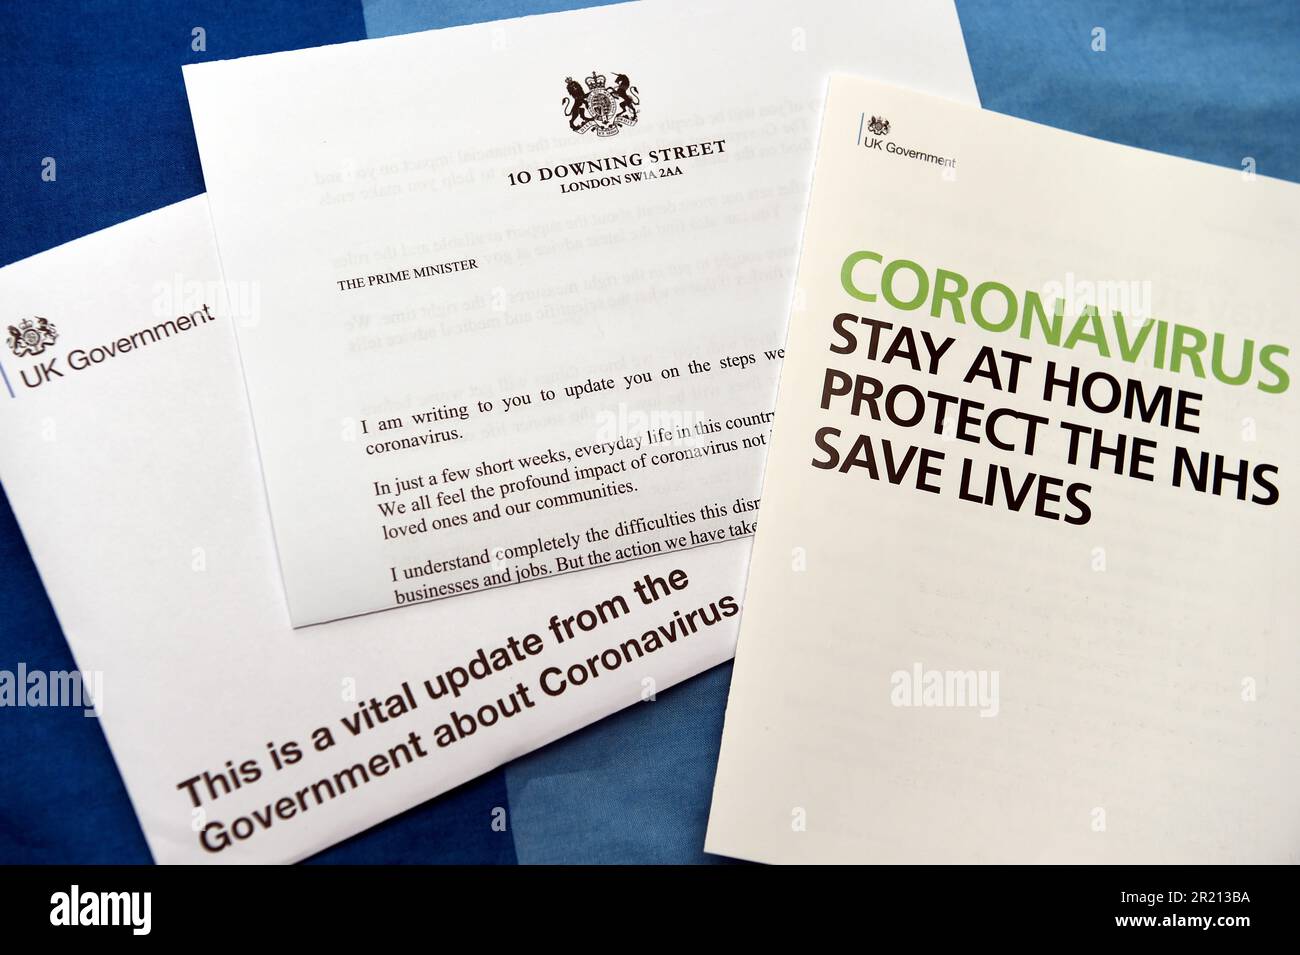 Photograph showing the letter sent out by the UK government and the Prime Minister Boris Johnson to every UK household during the COVID-19 pandemic. The letter urged people to stay at home, protect the NHS, and to save lives. Stock Photo